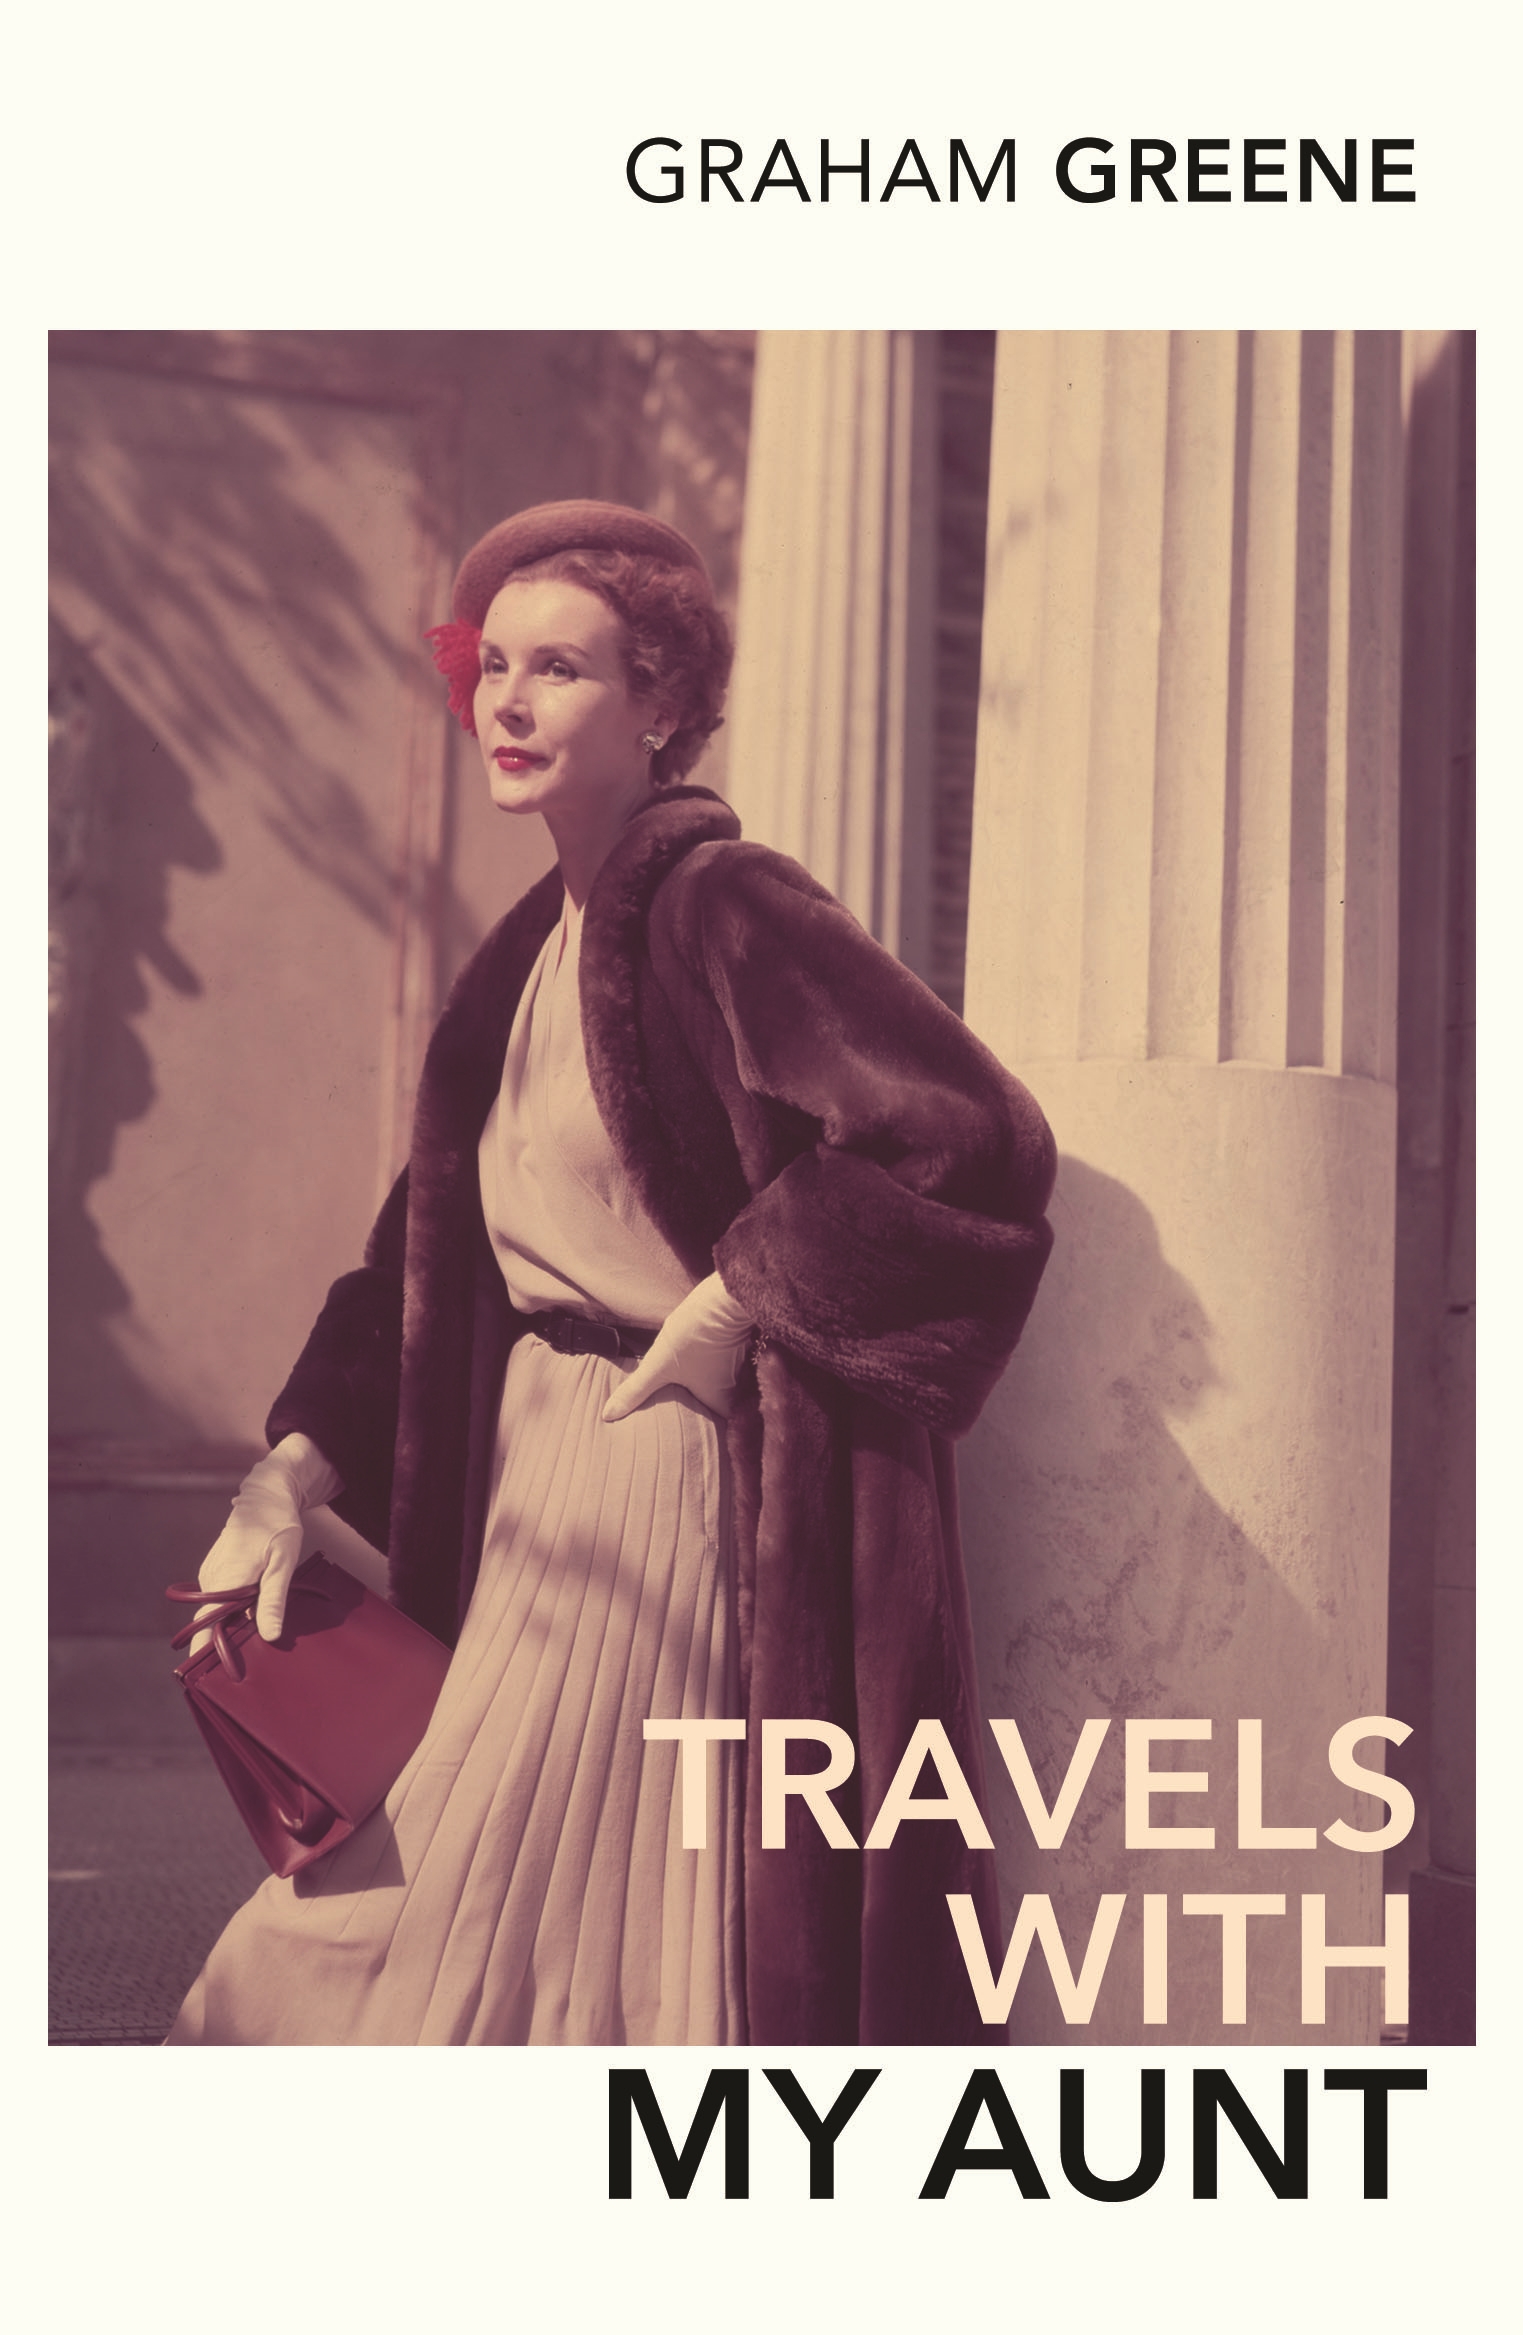 The cover of Graham Greene's book 'Travels with my Aunt'